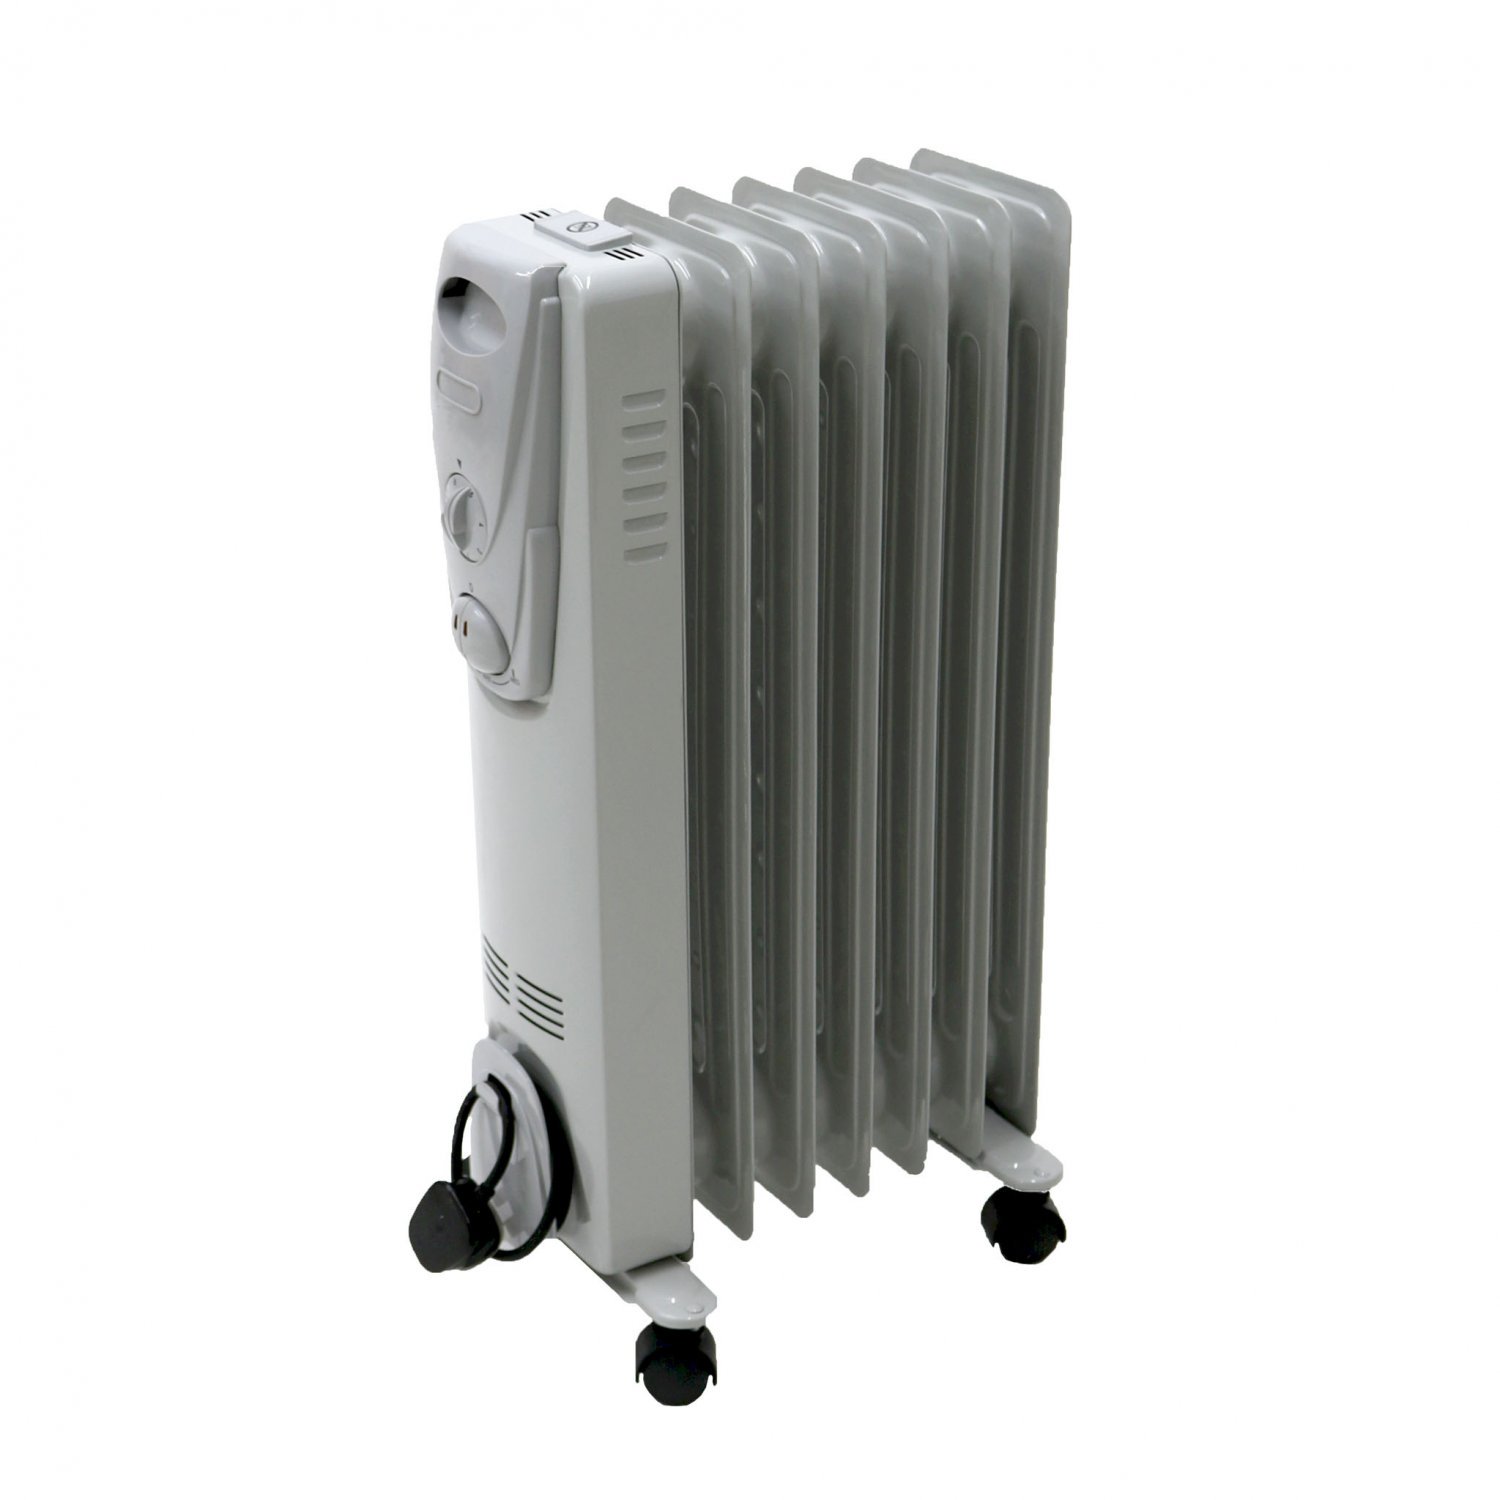 1500W 7 Fin Portable Oil Filled Radiator Electric Heater